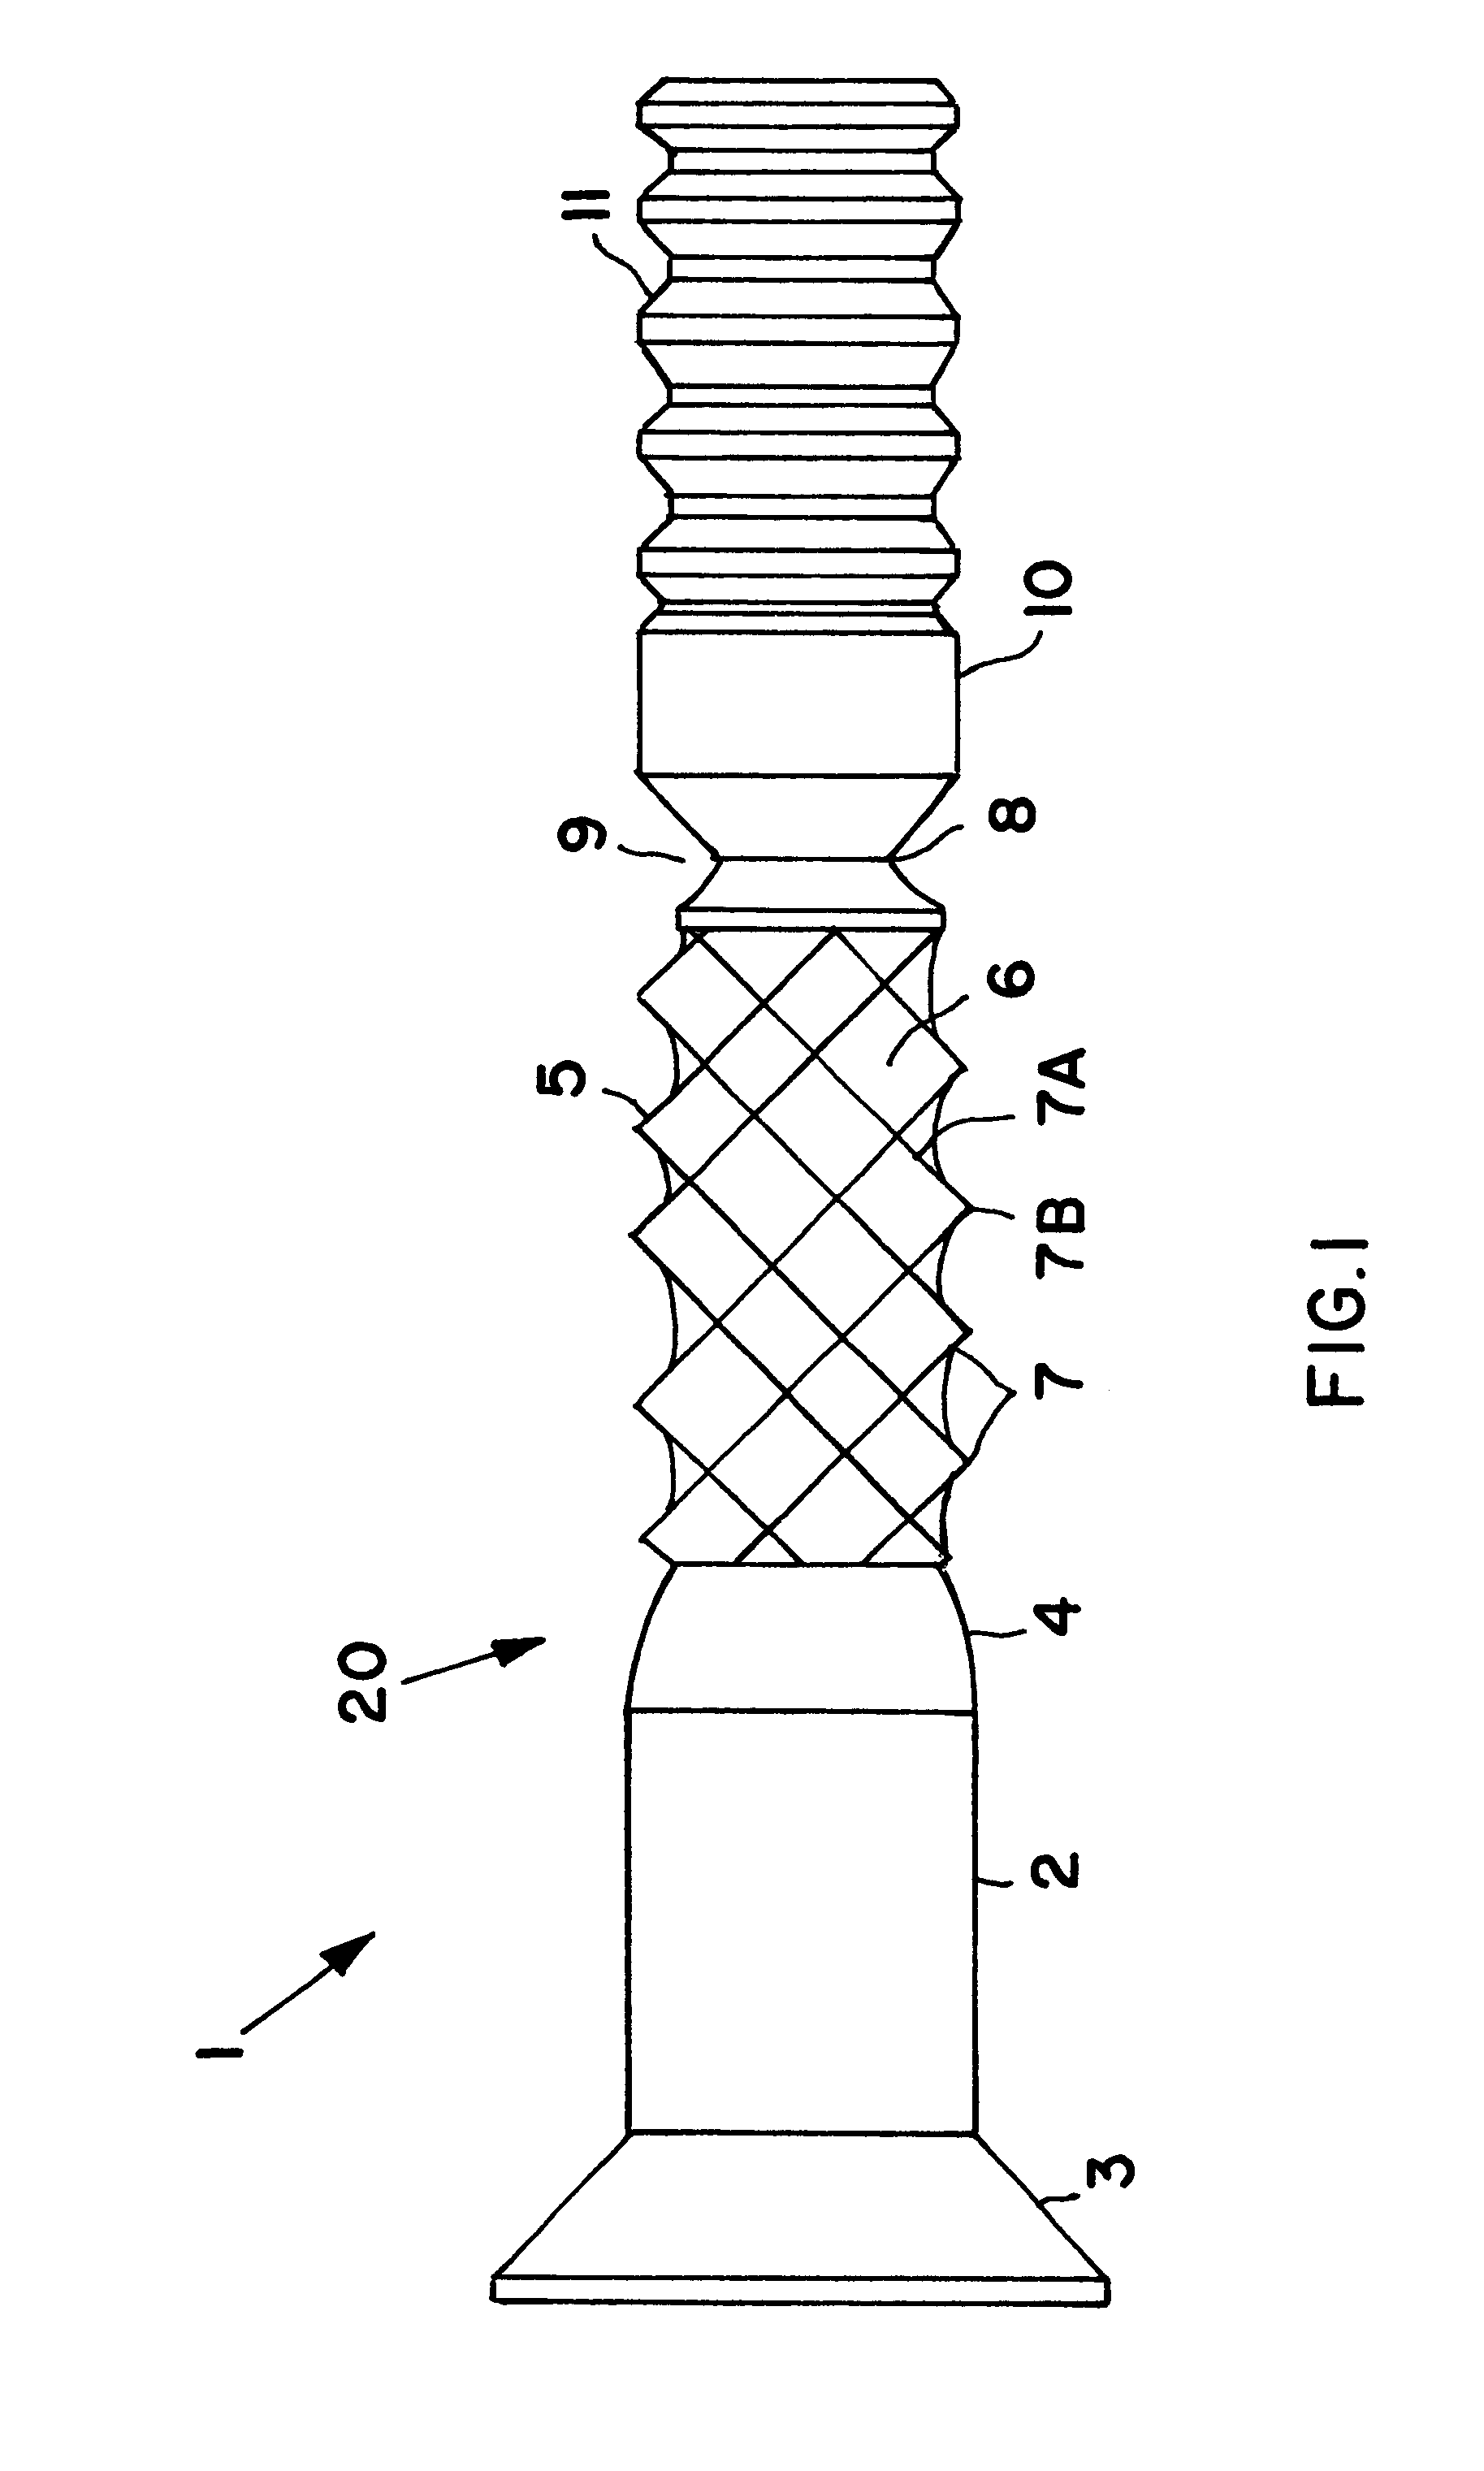 Lockbolt for forming a mechanically secured and sealant sealed connection between components